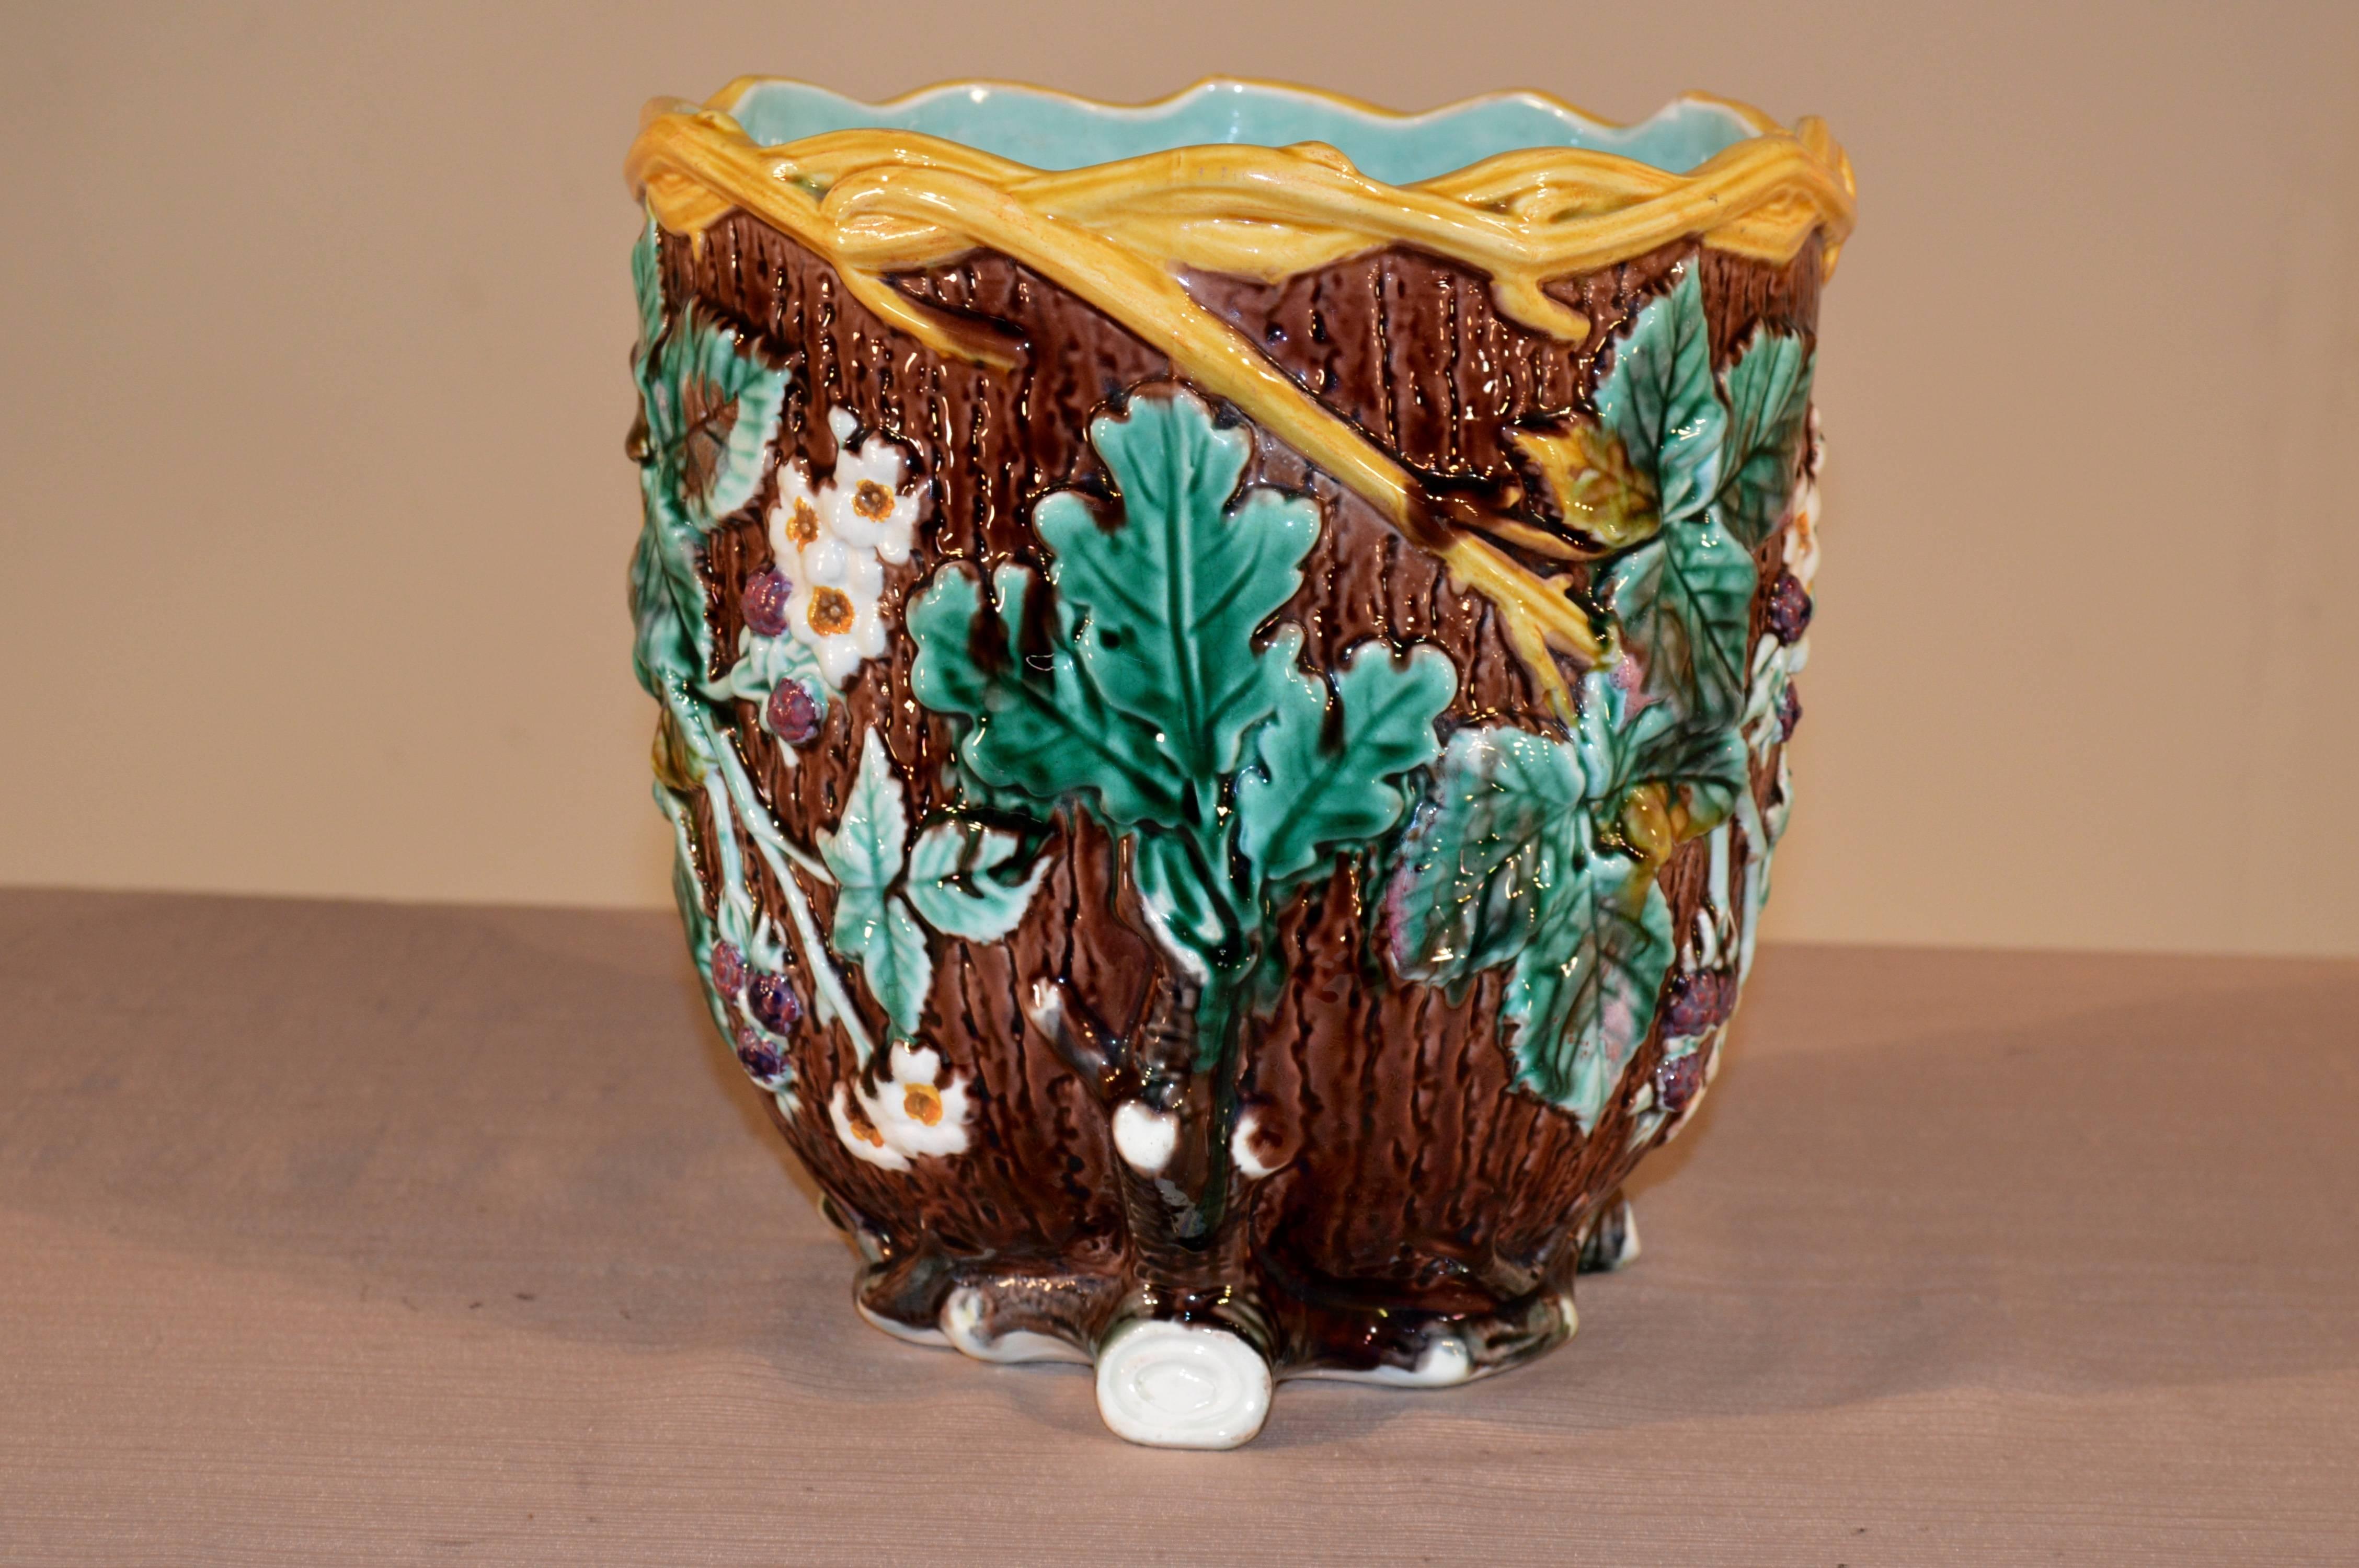 19th century signed Wedgwood majolica jardiniere with a faux bois pattern on the sides and a moulded top rim which looks like twigs. The planter itself is decorated with lovely leaves and flowers in gorgeous colors. There is old chip repair to one